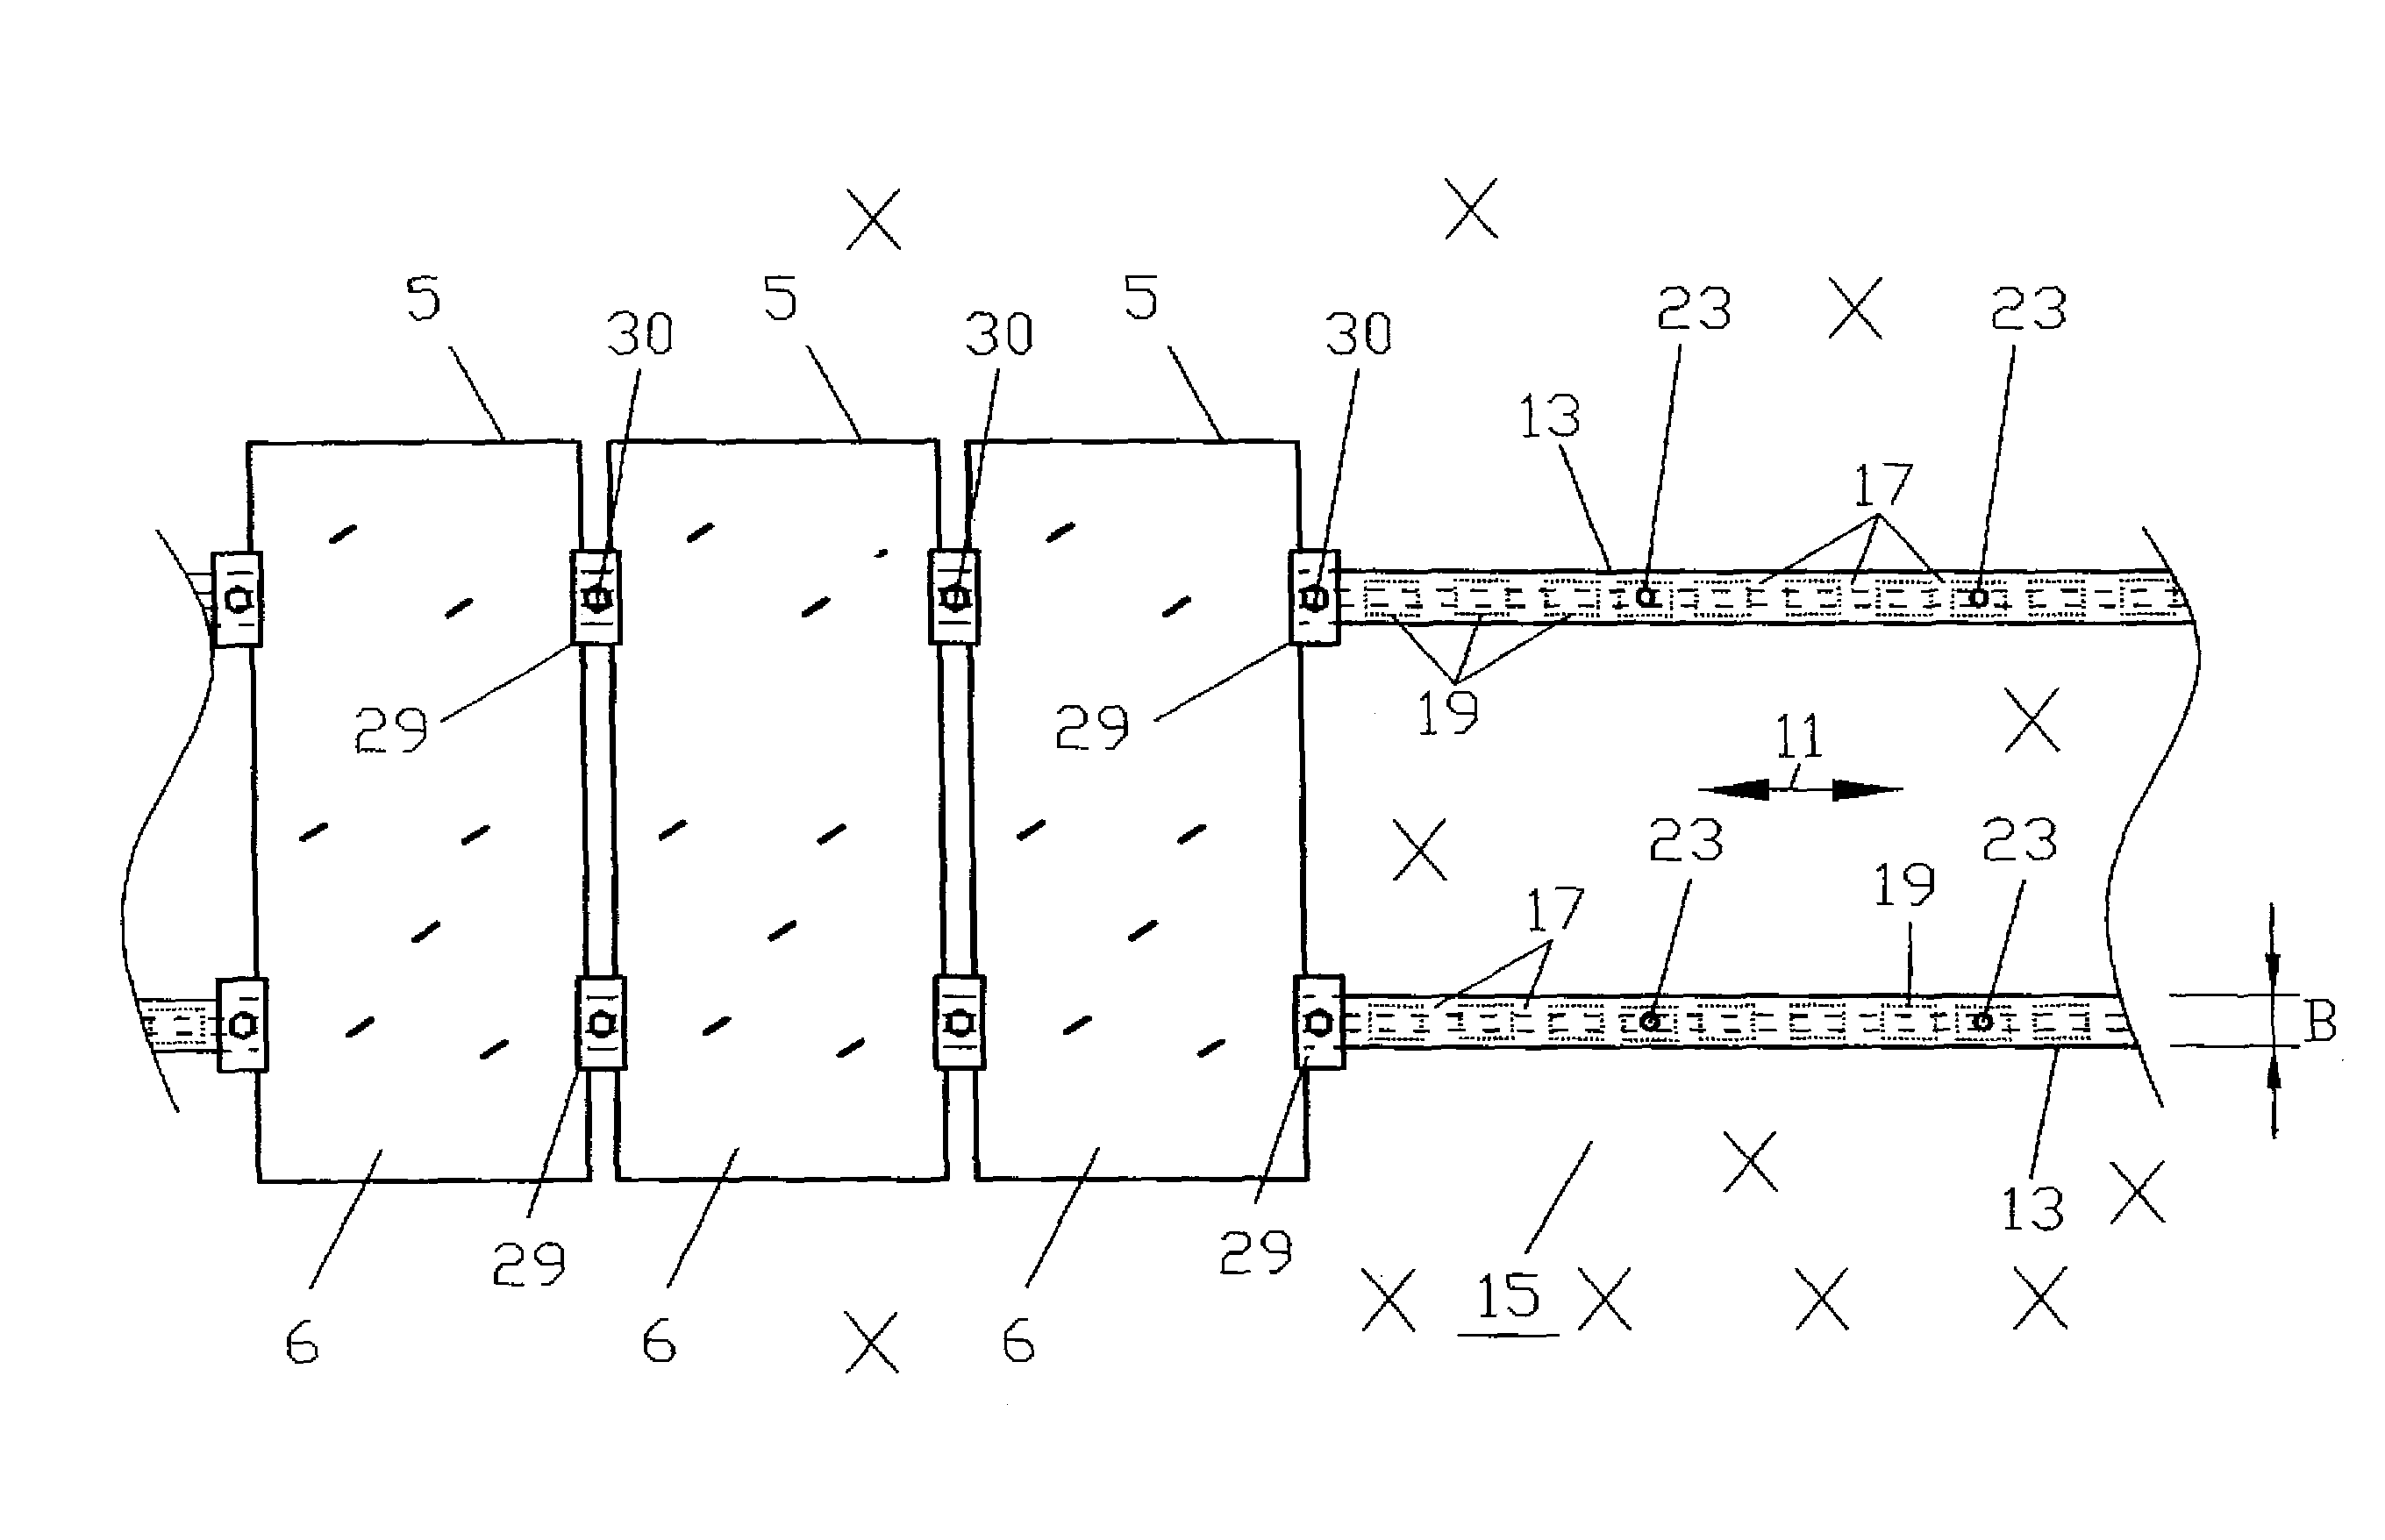 Mounting support for photovoltaic modules